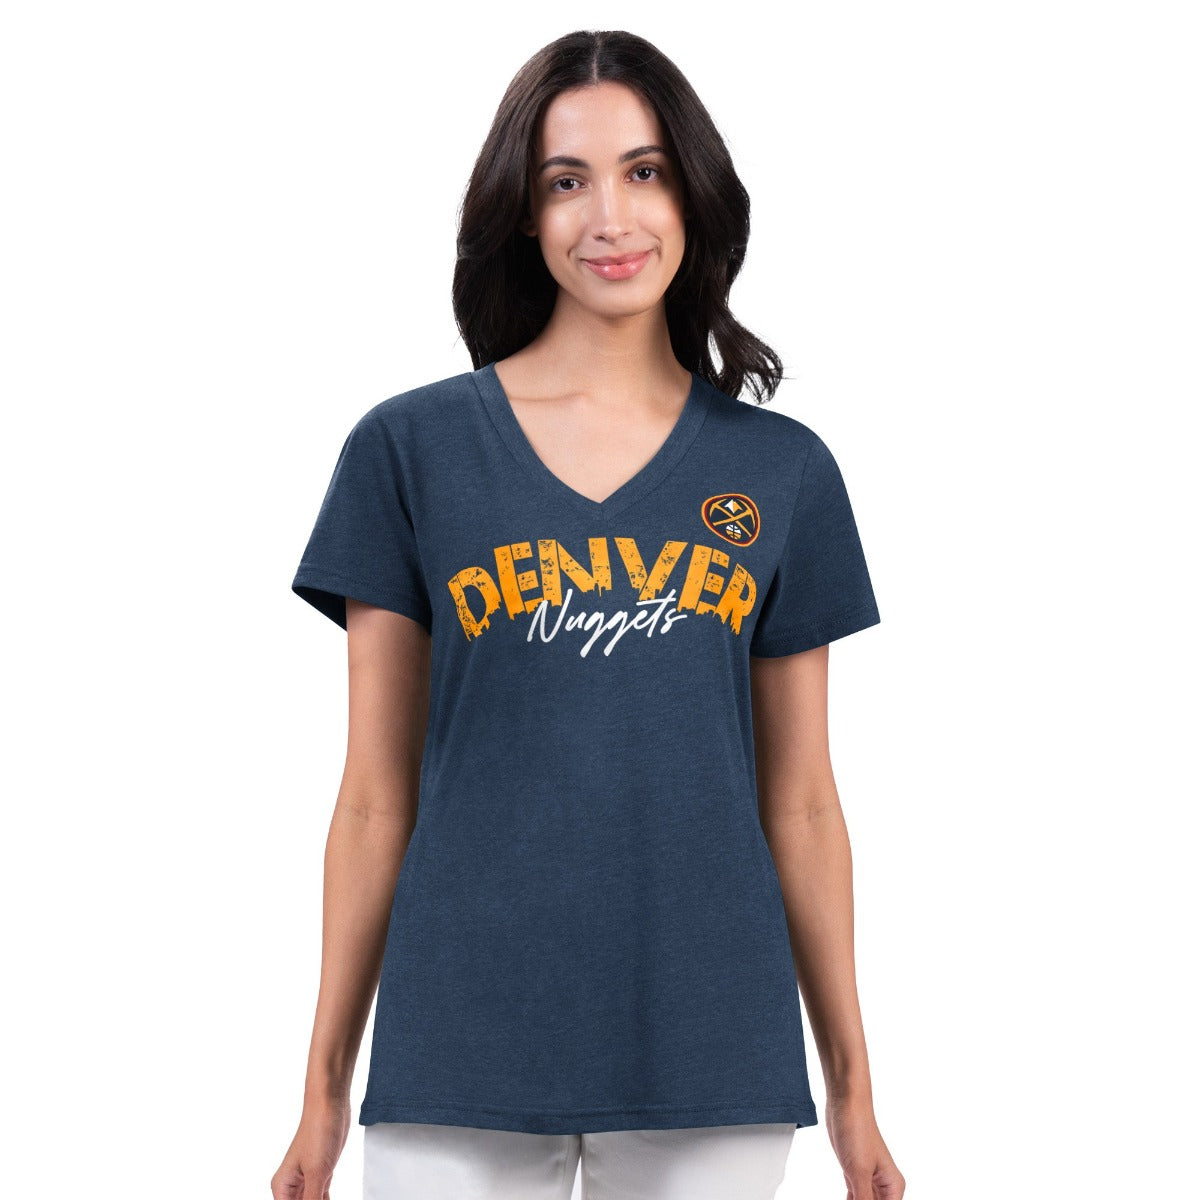 Light grey tee, Denver in navy, Nuggets in white Script, Nuggets logo on left chest above the word Denver